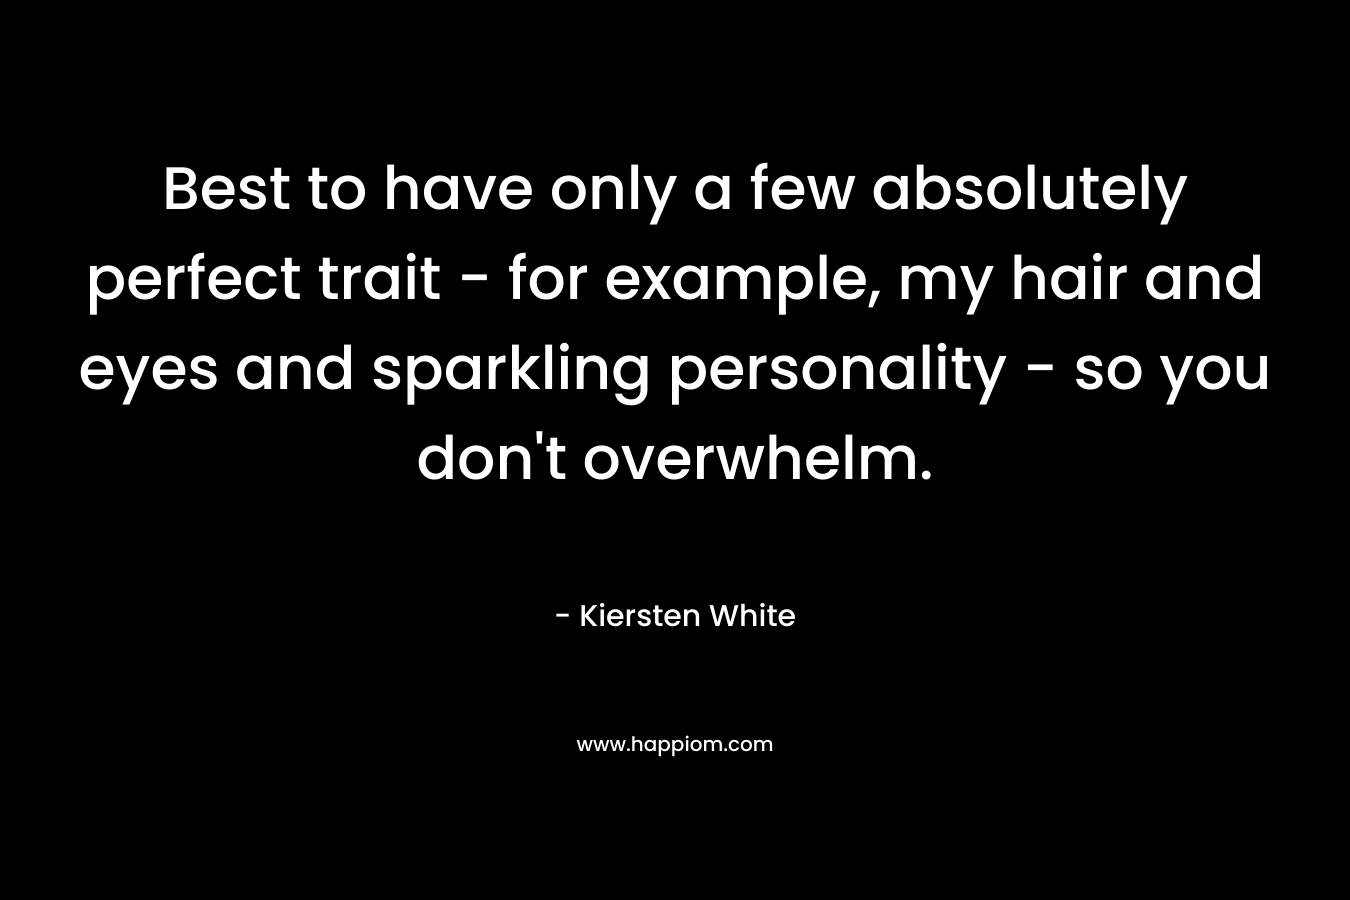 Best to have only a few absolutely perfect trait – for example, my hair and eyes and sparkling personality – so you don’t overwhelm. – Kiersten White